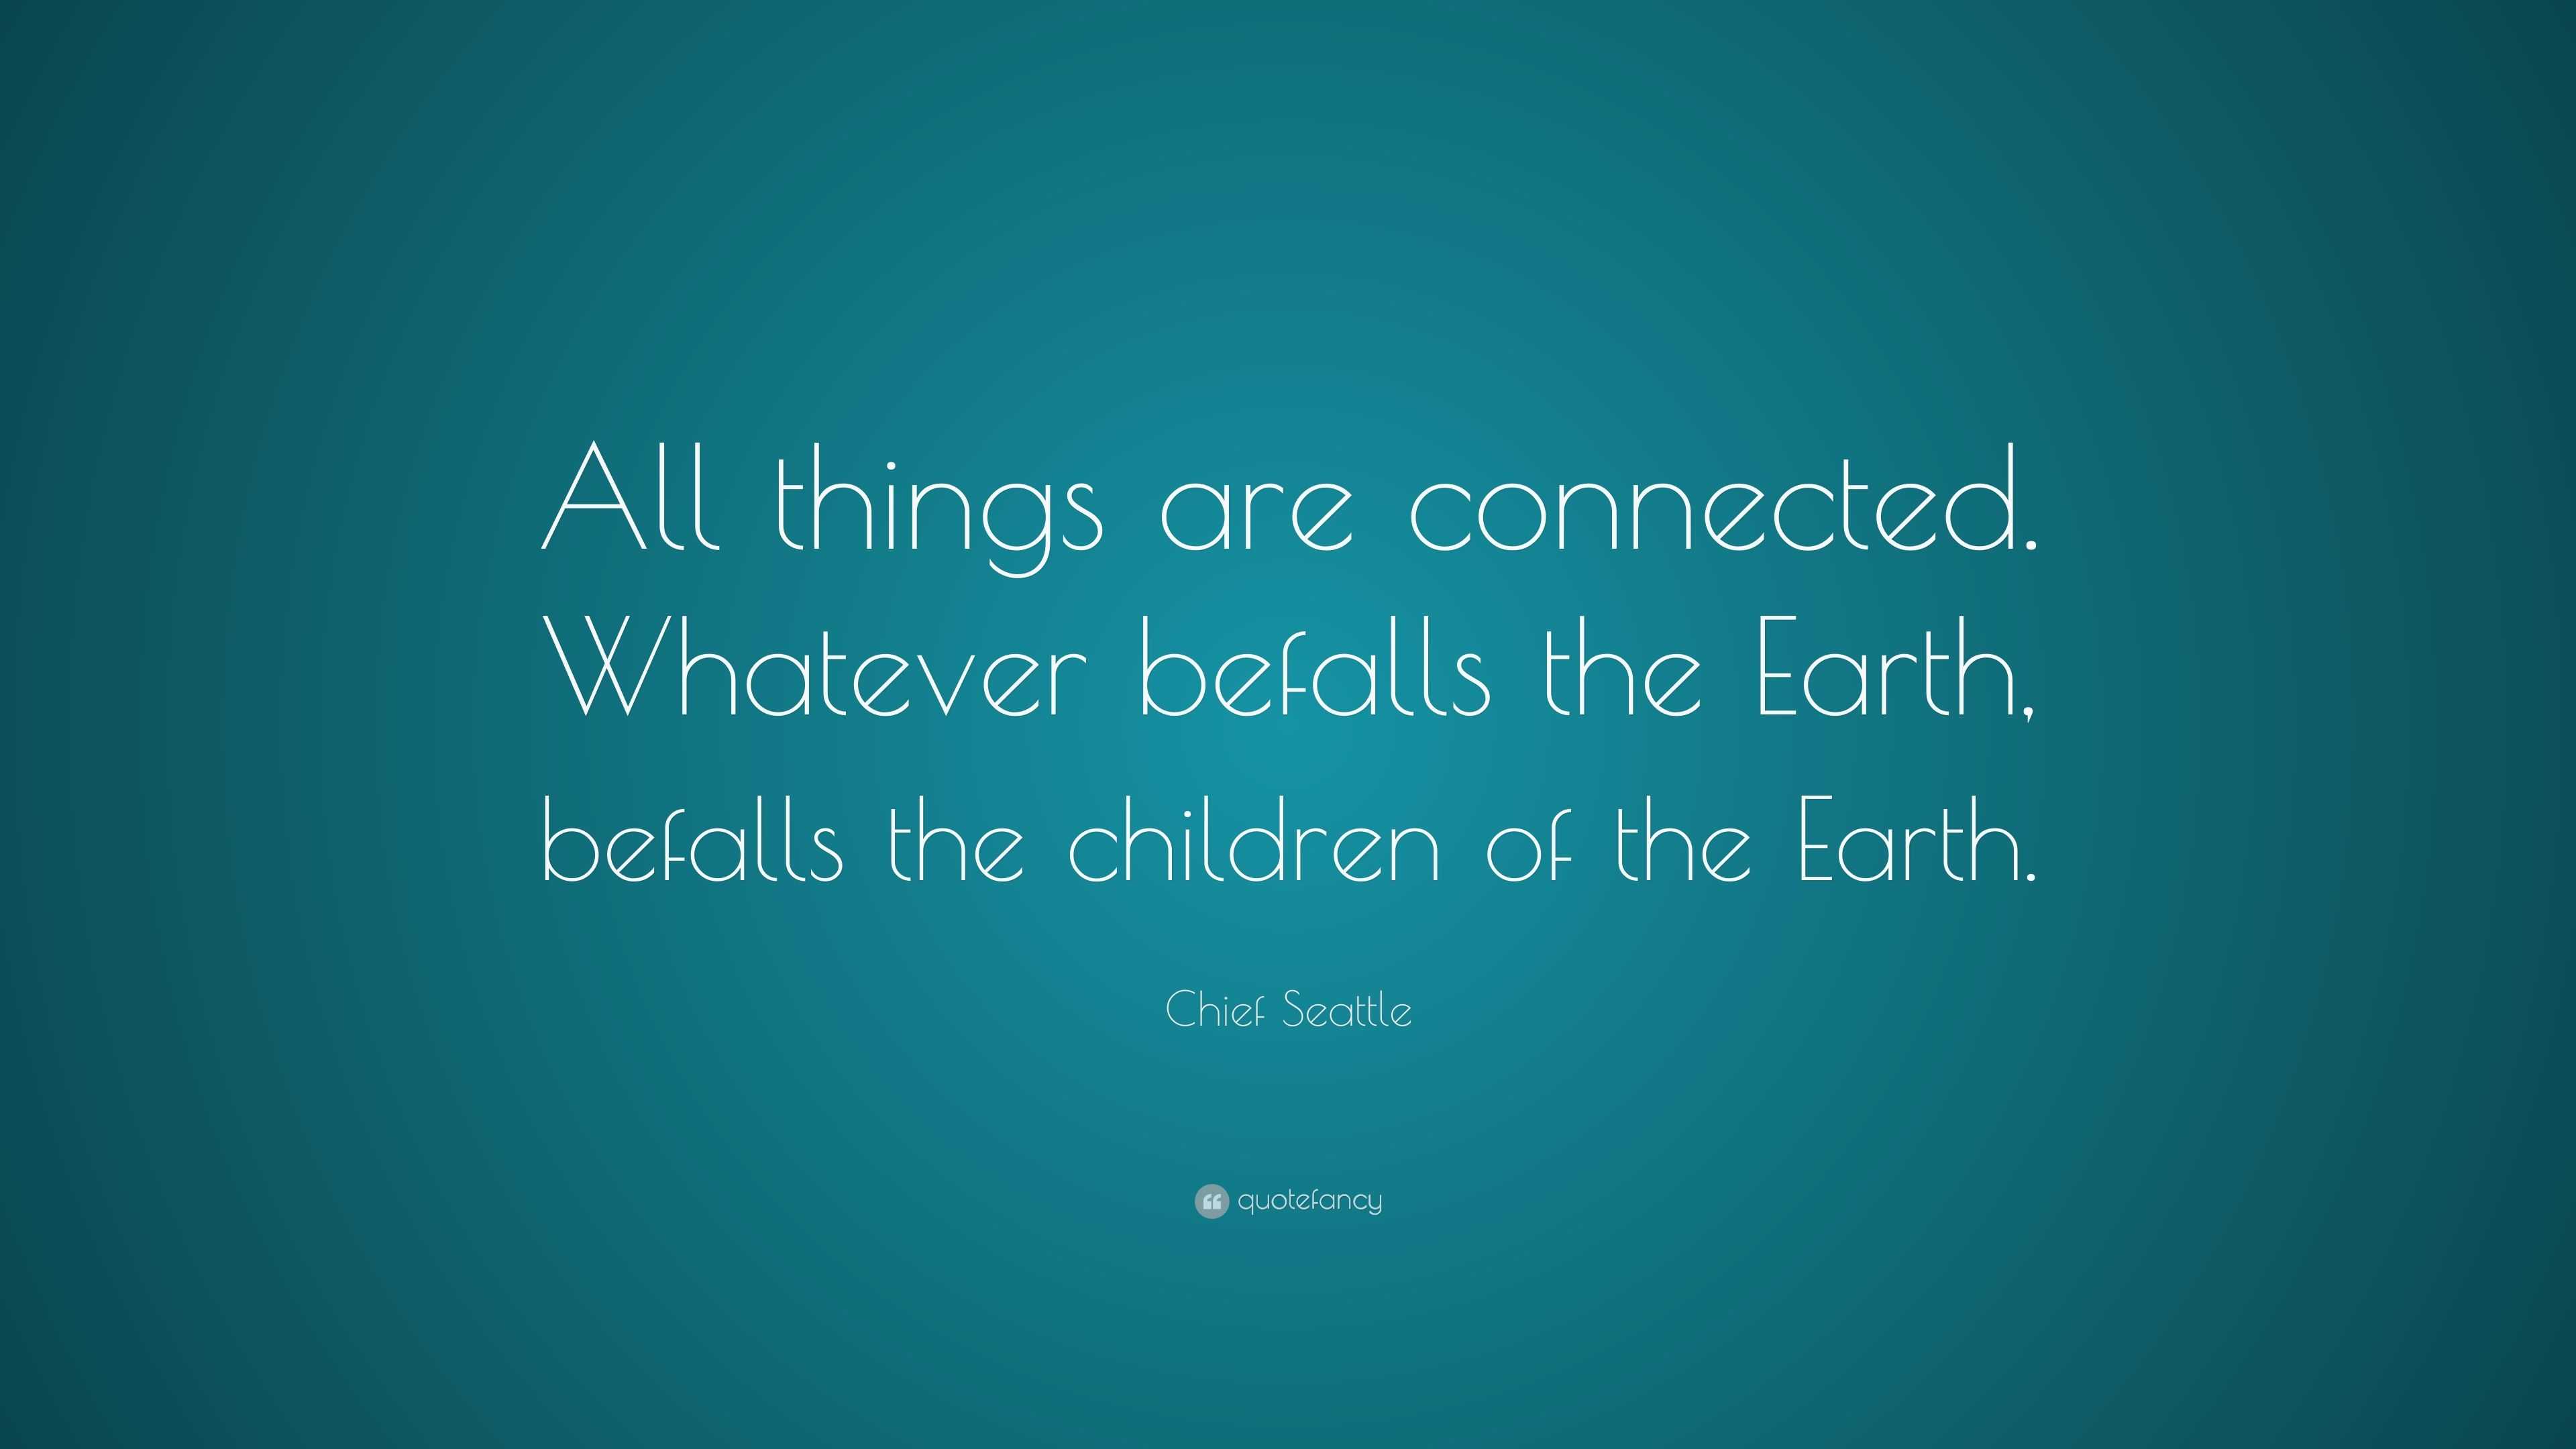 Chief Seattle Quote: “All things are connected. Whatever befalls the